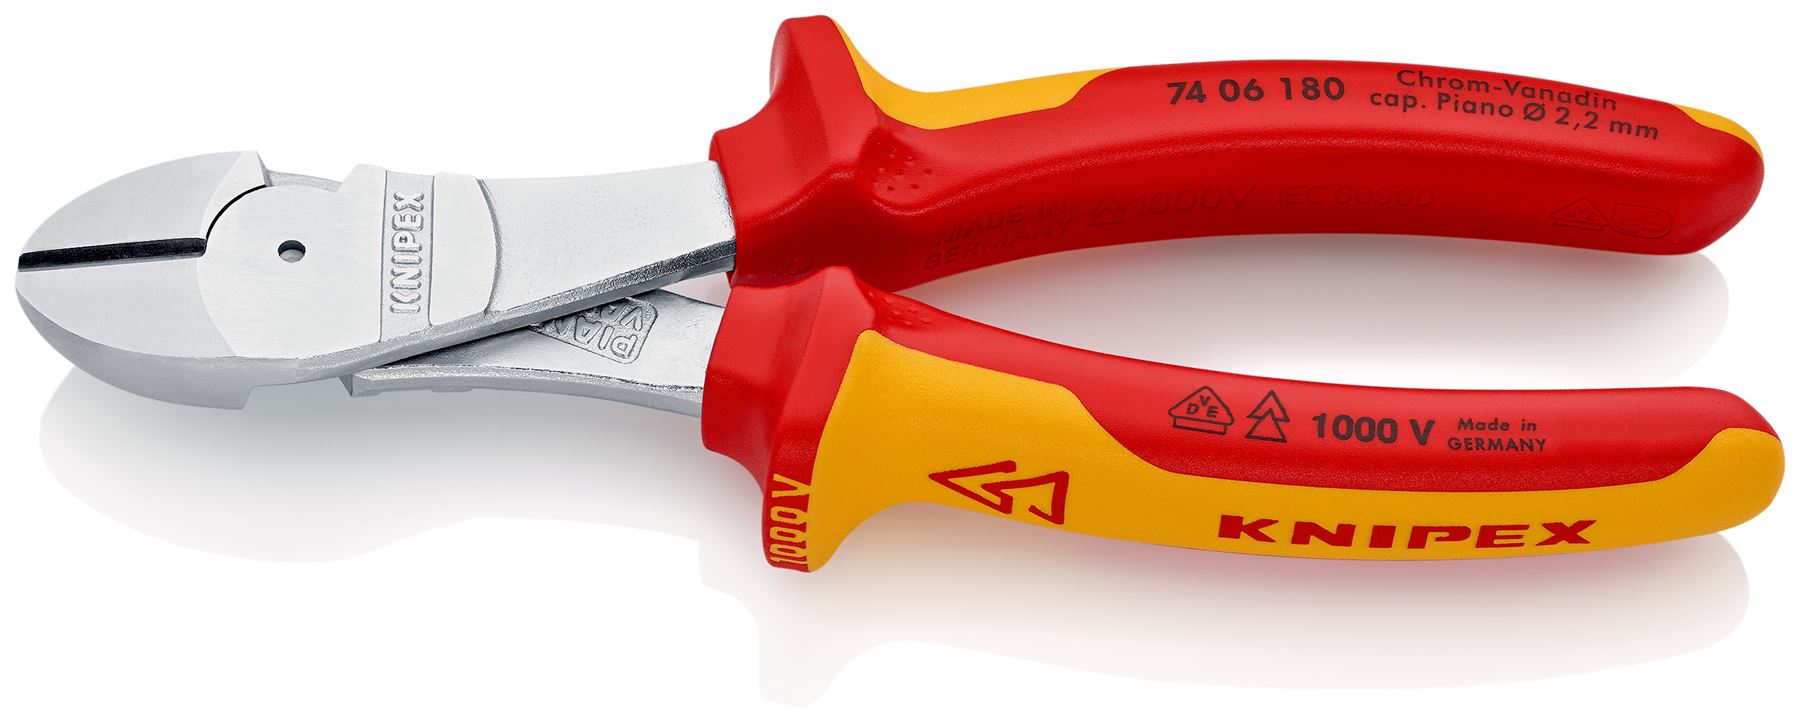 KNIPEX Diagonal Cutting Pliers High Leverage Side Cutters 180mm VDE Multi Component Grips 74 06 180 SB